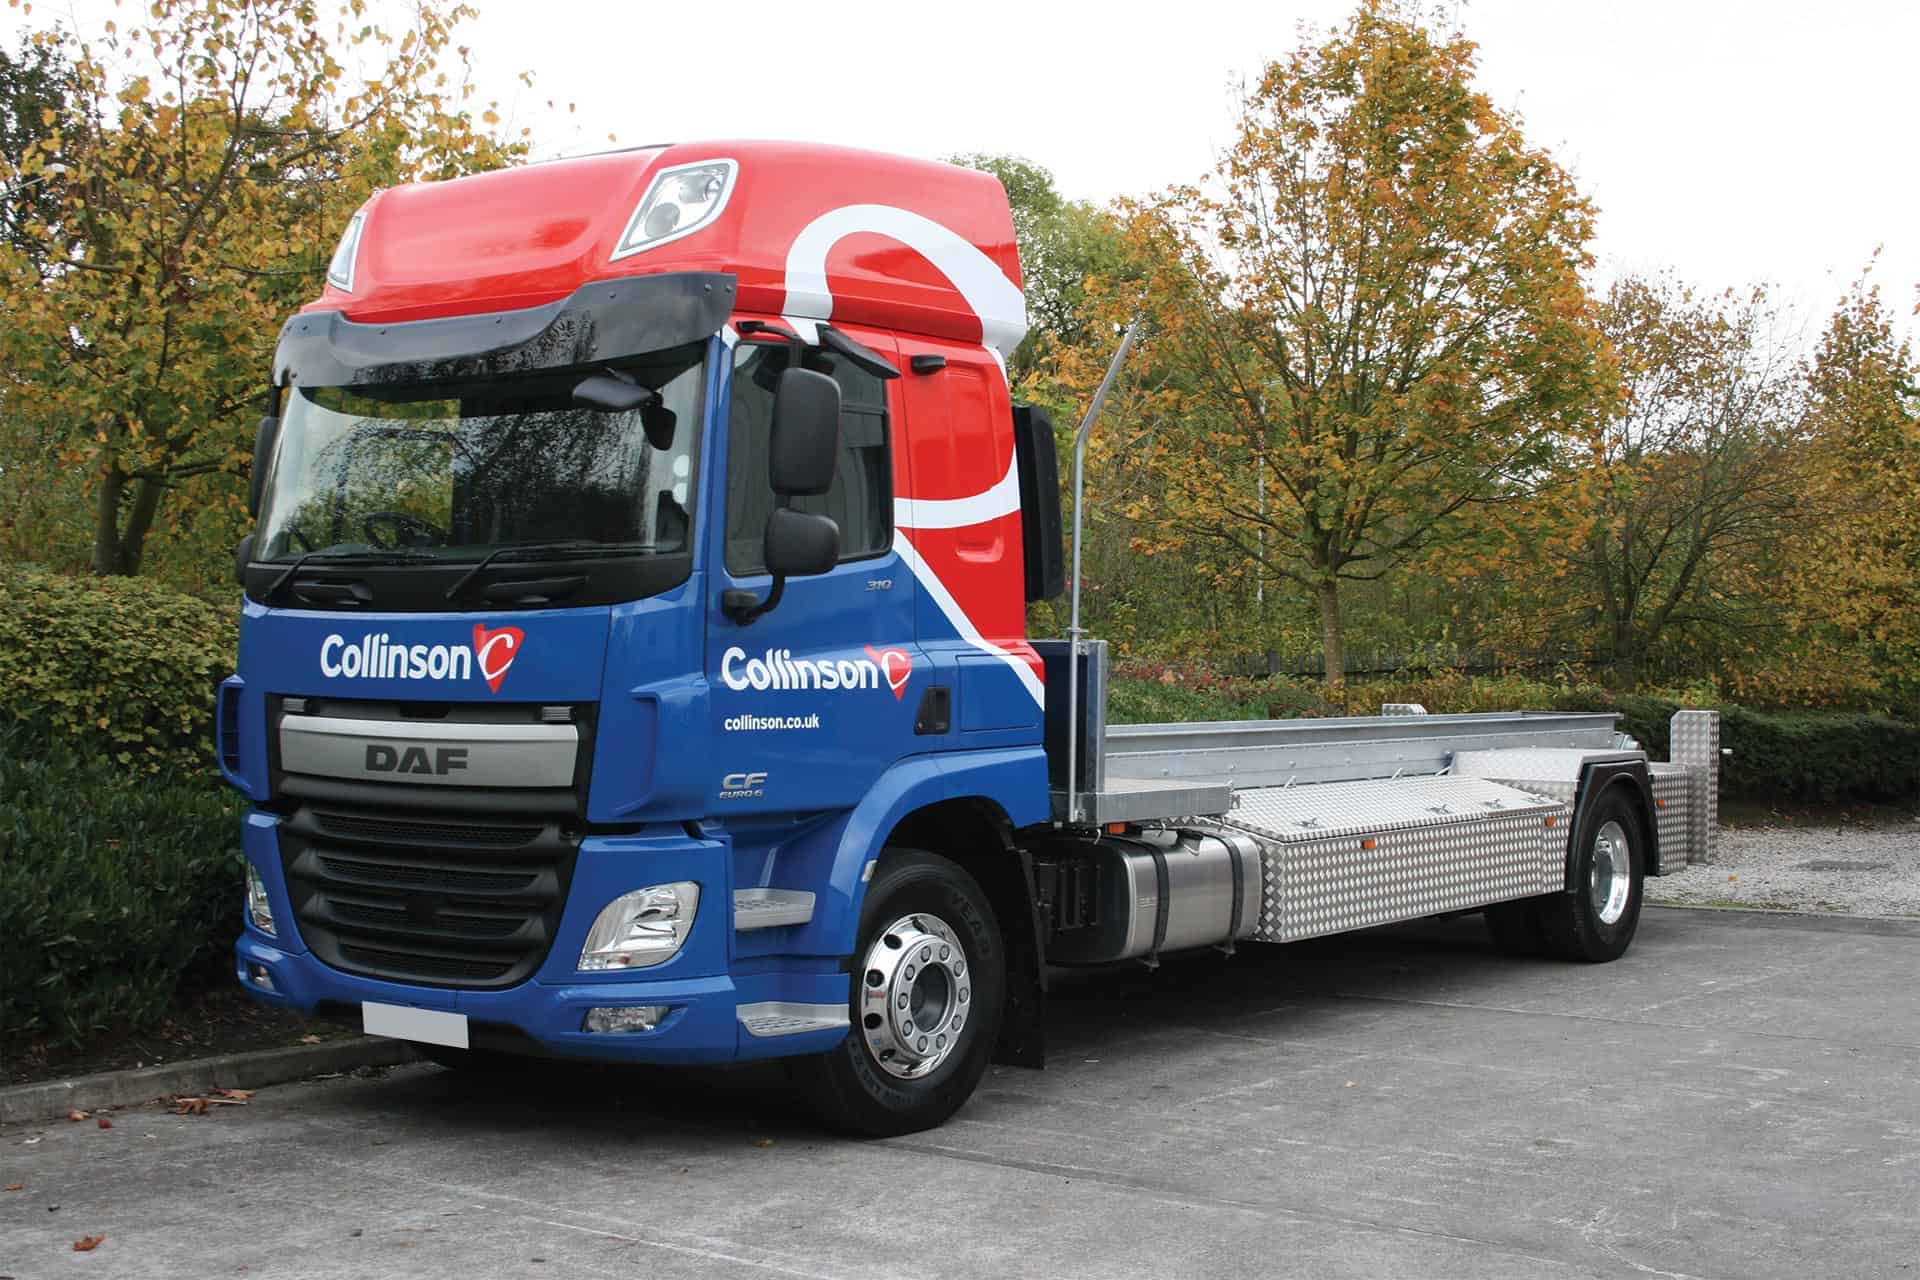 Collinson - full vehicle wrap using colour change red white and blue wrapping vinyl